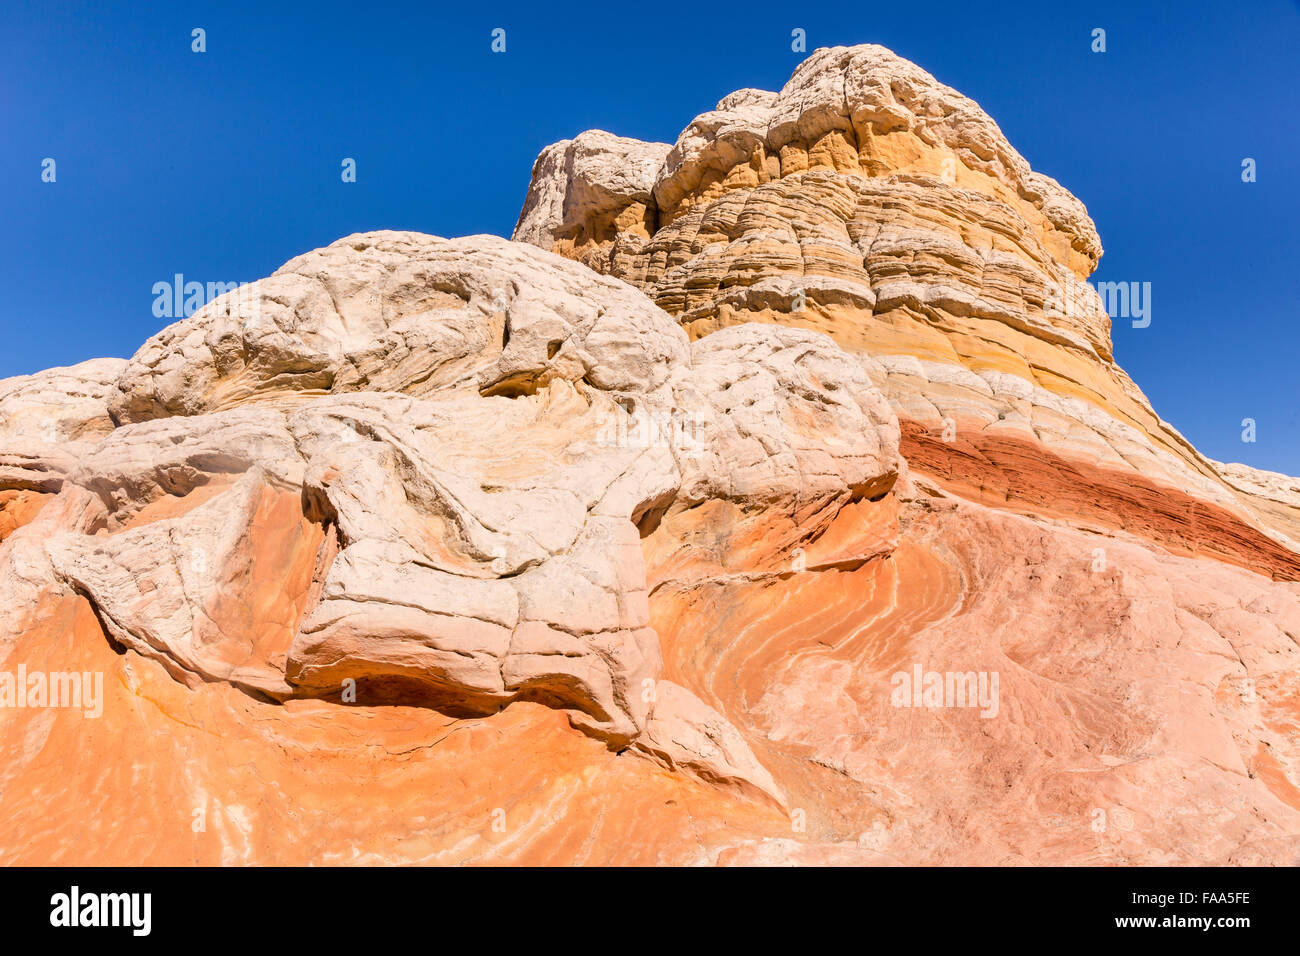 A turtle-shaped rock in the unique and remote White Pocket rock formations in Vermillion Cliffs National Monument in Arizona. Stock Photo